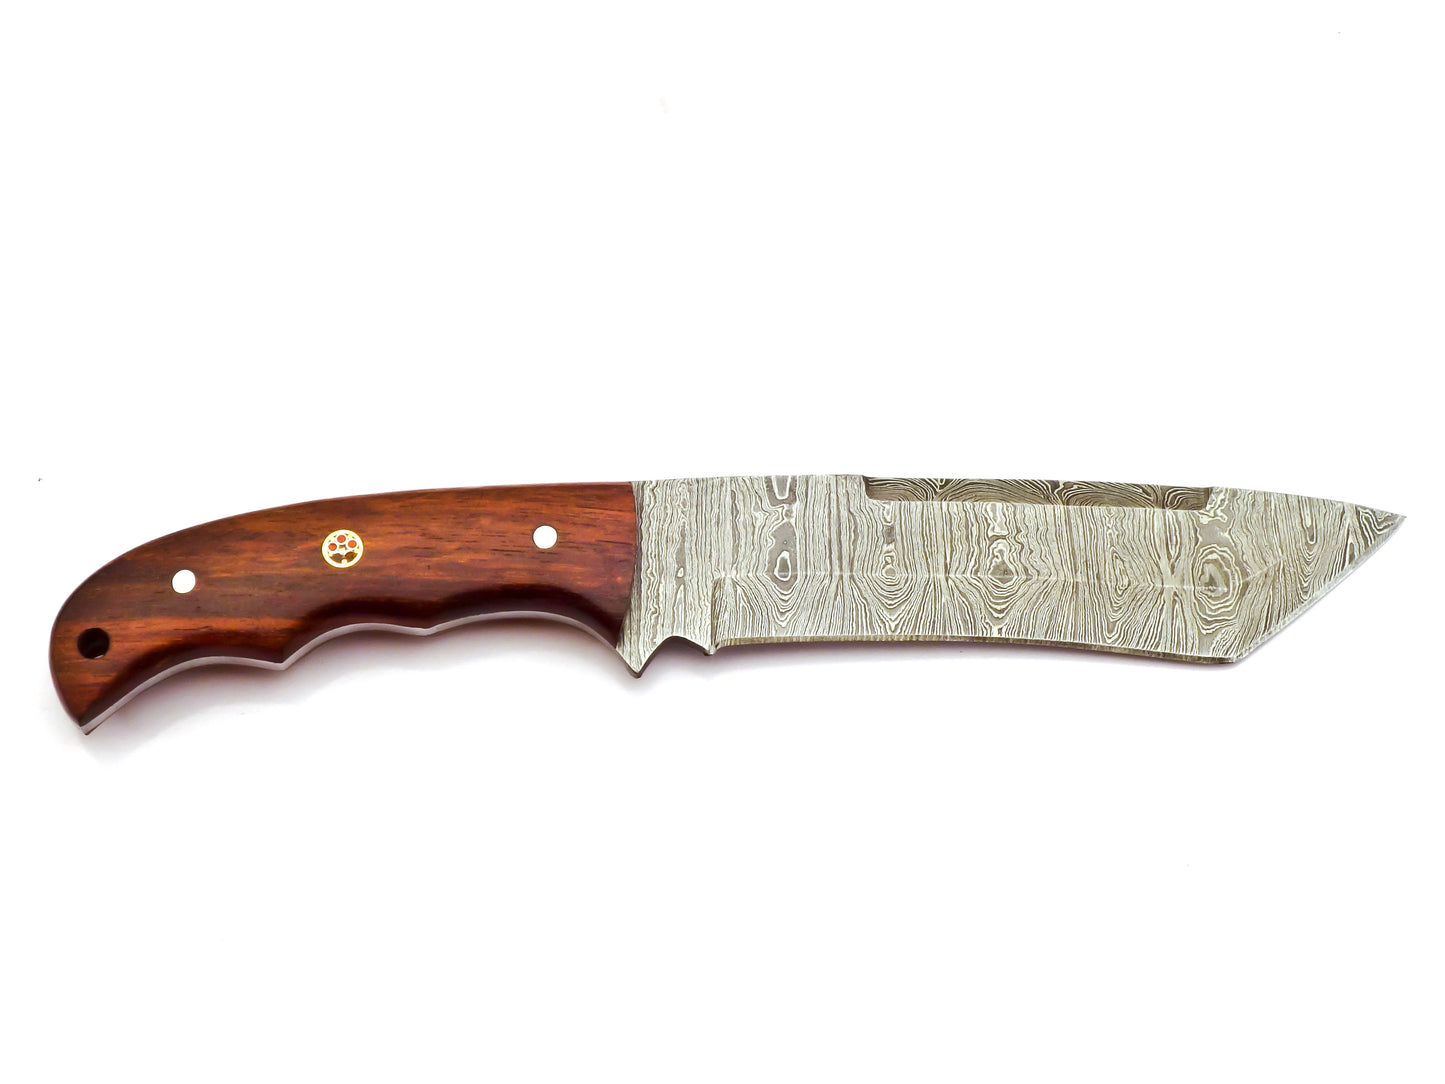 Masterfully Crafted 11-Inch Damascus Steel Tracker Knife: Premium Hunting Tool with Sheath